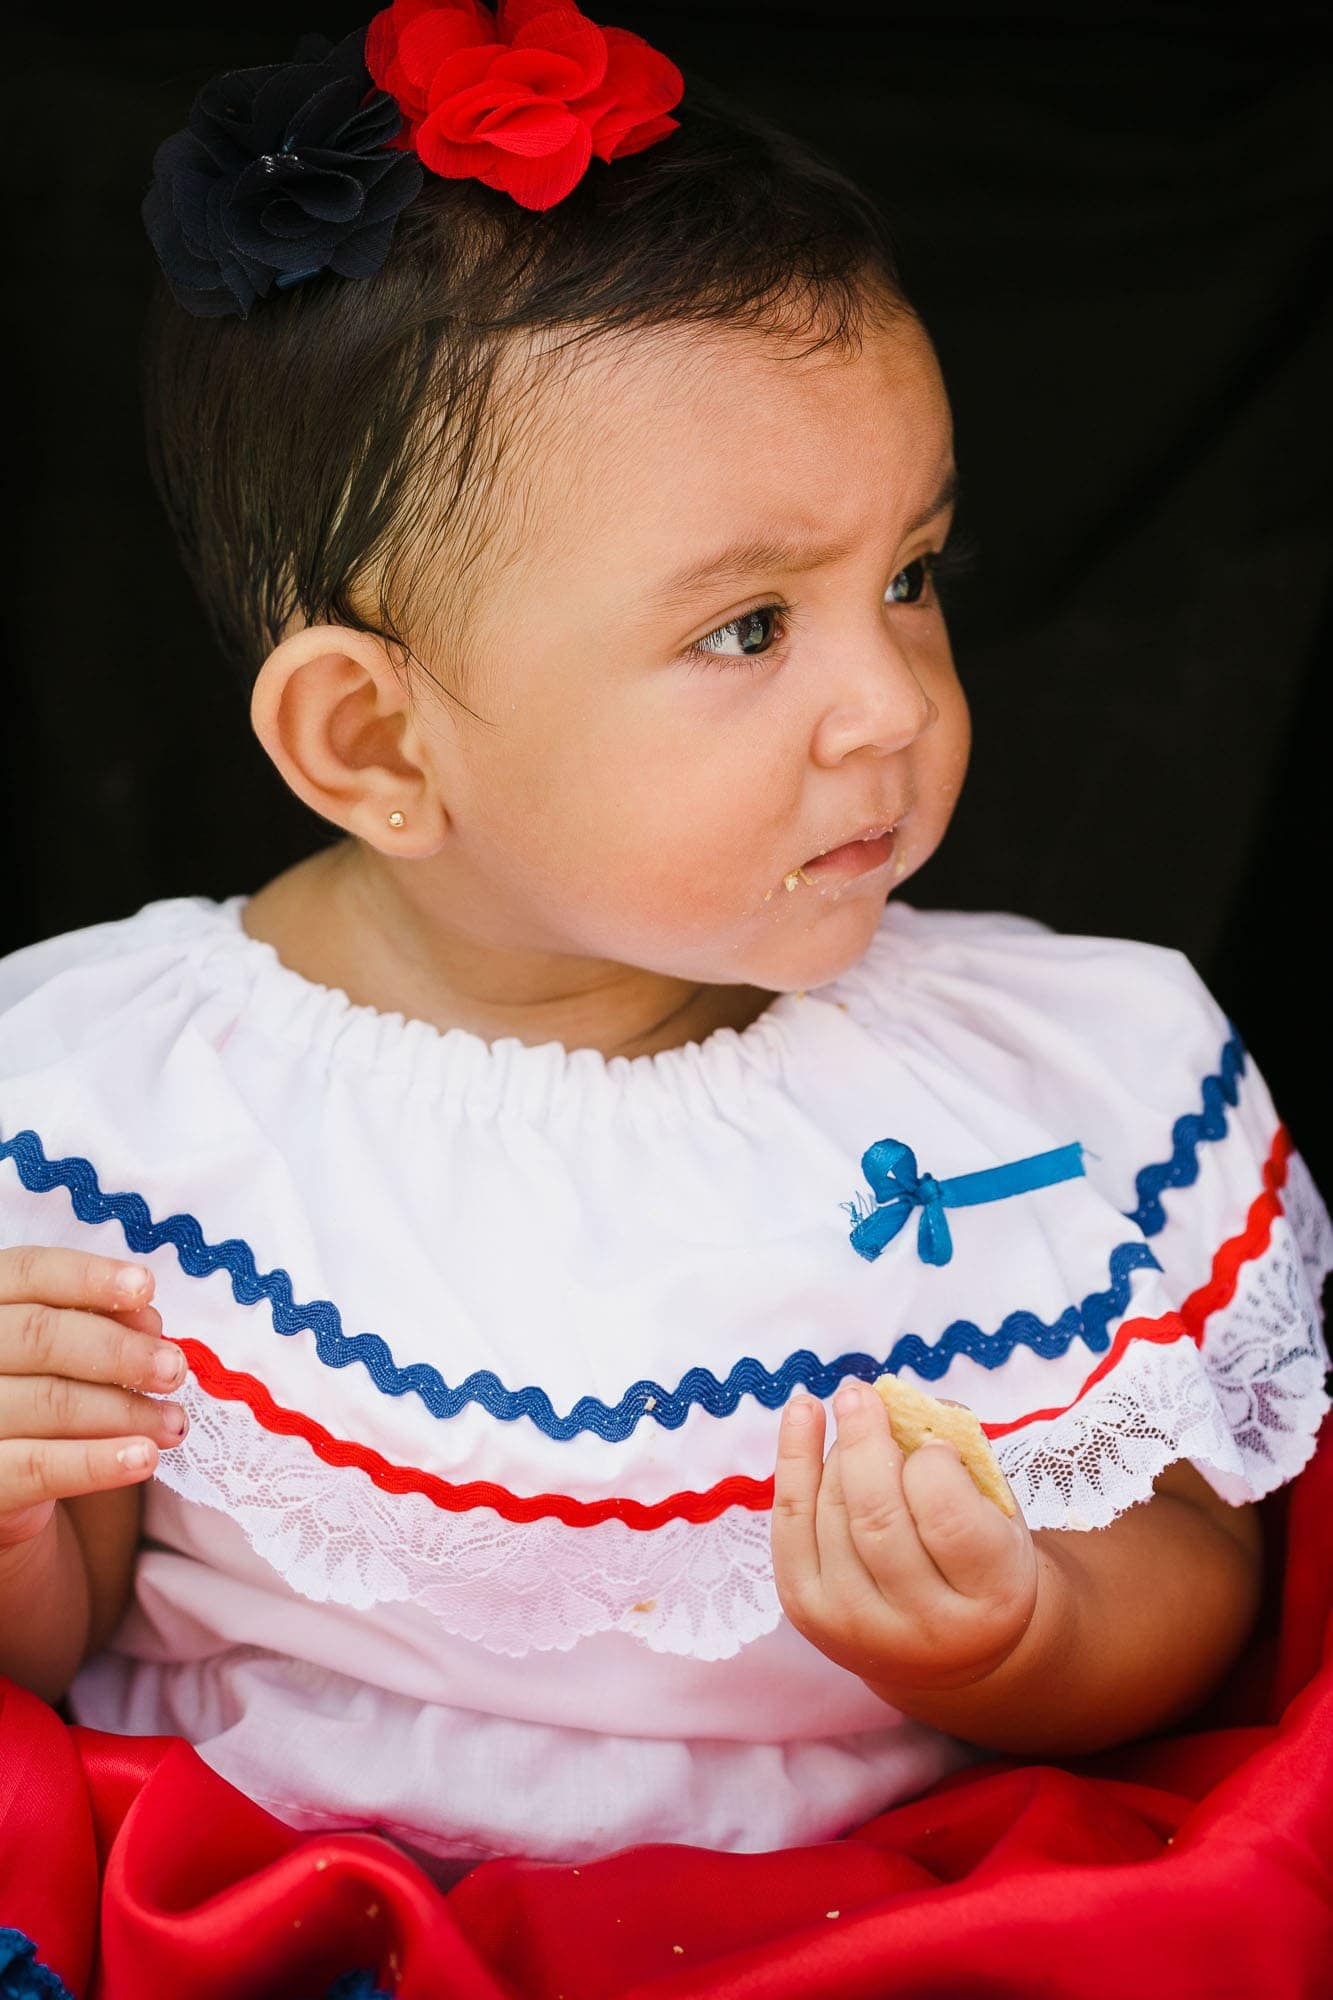 Little girl in campesino outfit (traditional Costa Rican clothing)